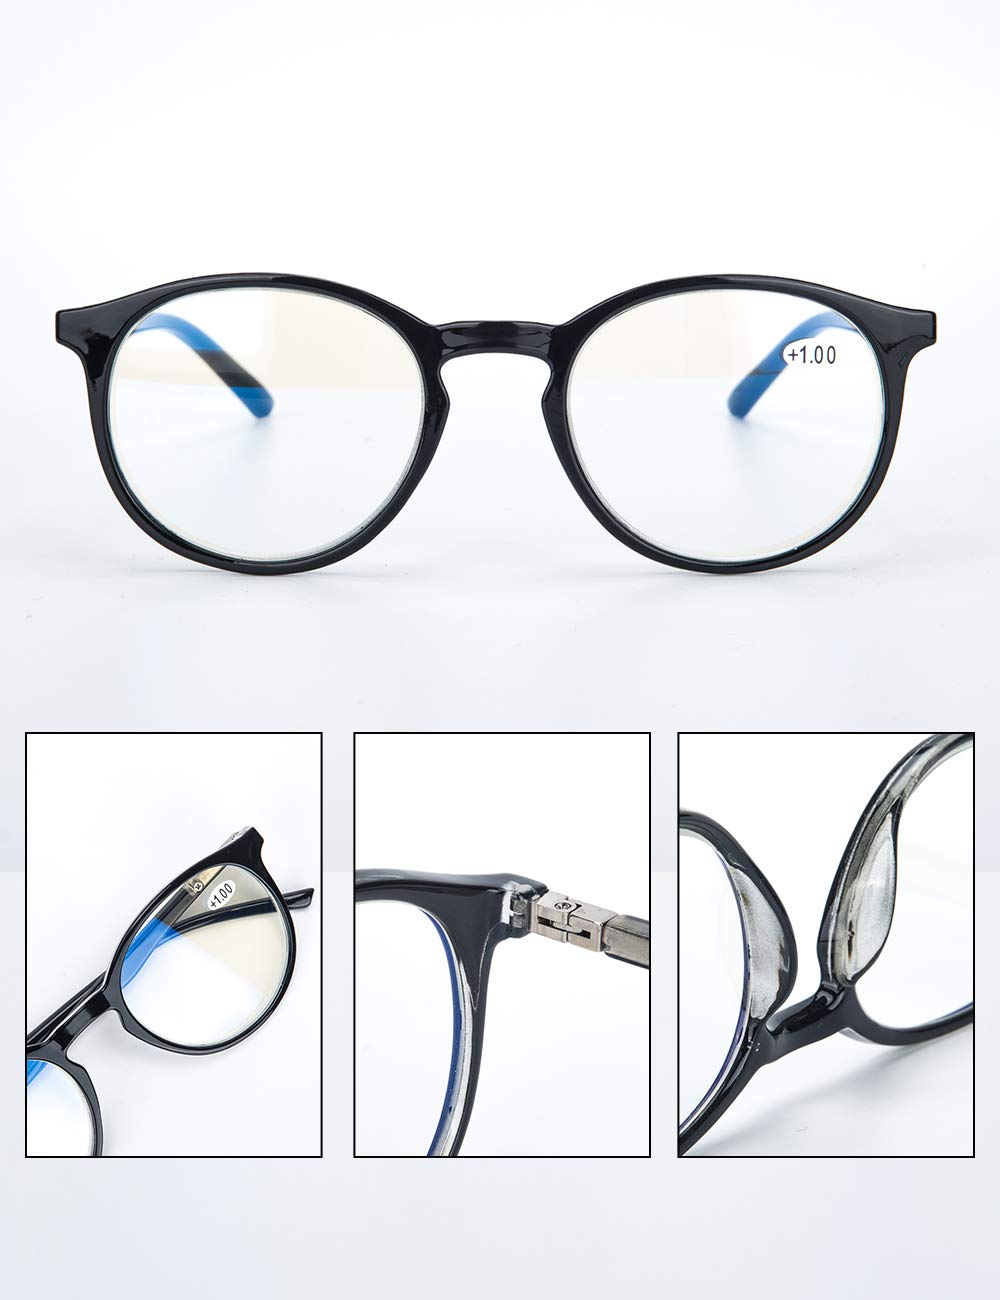 LANLANG 3-Pack Blue Light Blocking Reading Glasse for Women with round frame Anti Eyestrain 3 Colors L-L006